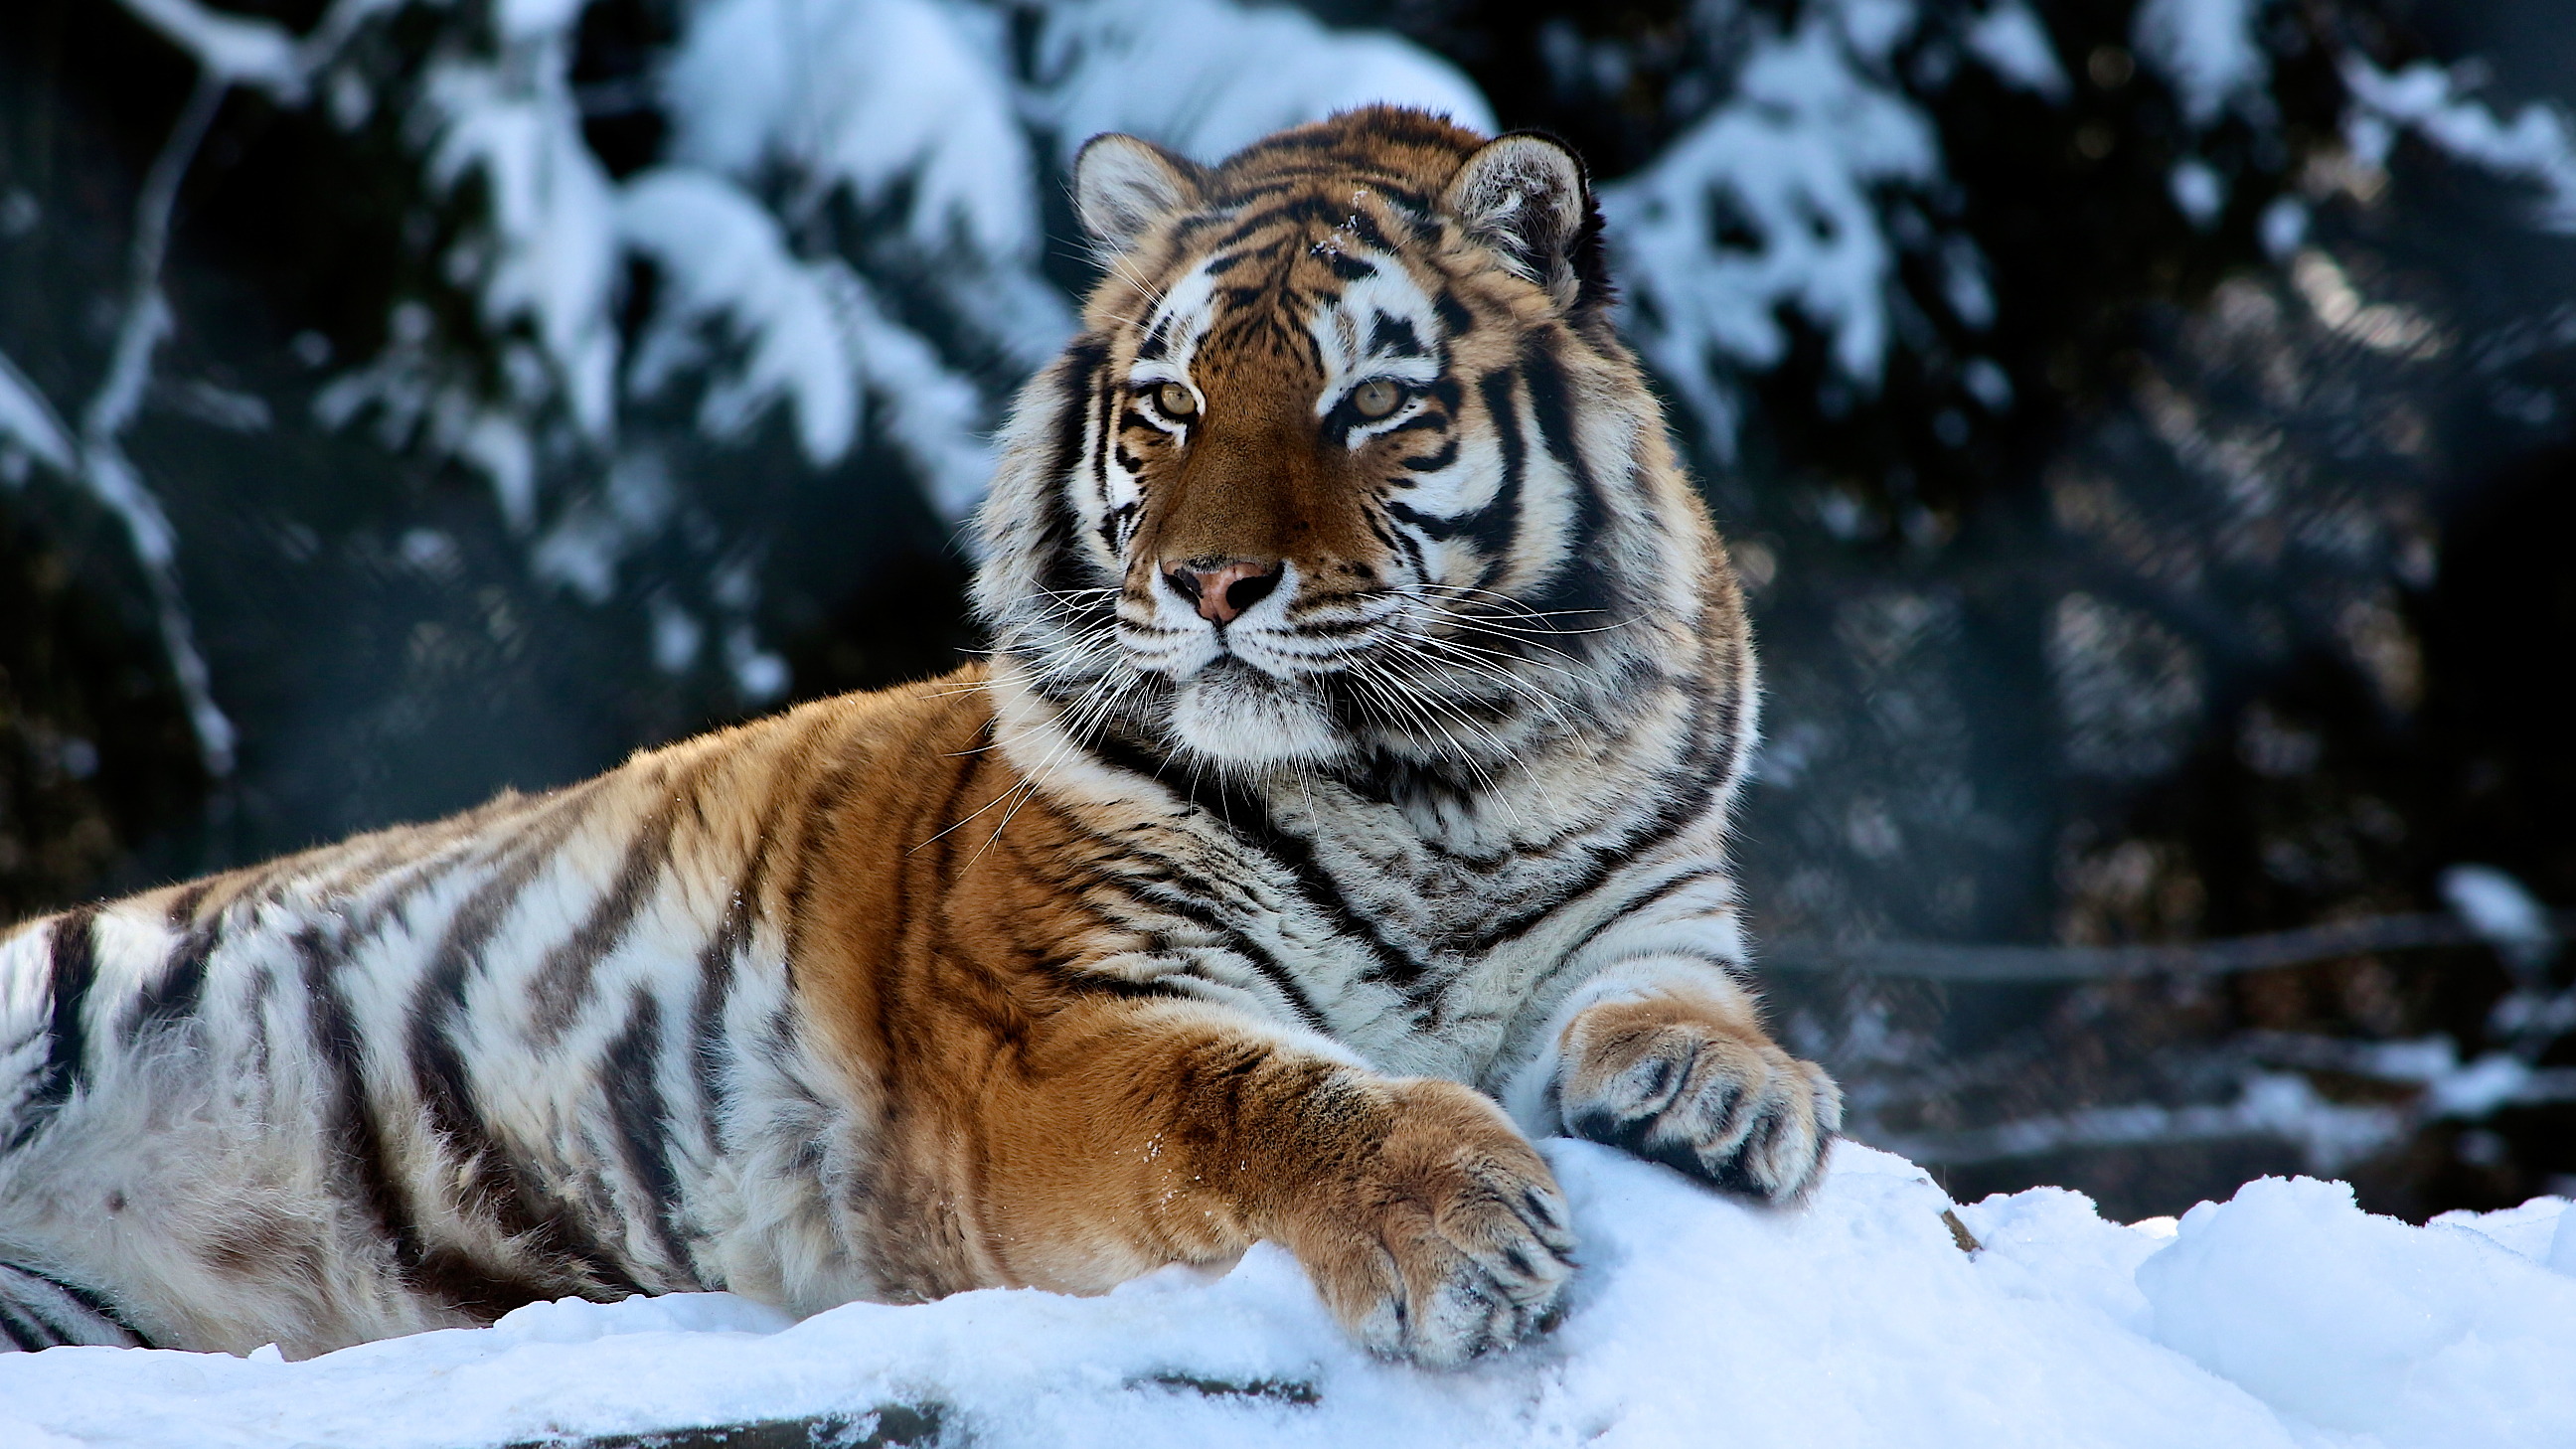 Animals Tiger Snow Big Cats Feline Mammals Stripes Cat Eyes Whiskers Outdoors Winter Nature 2592x1458